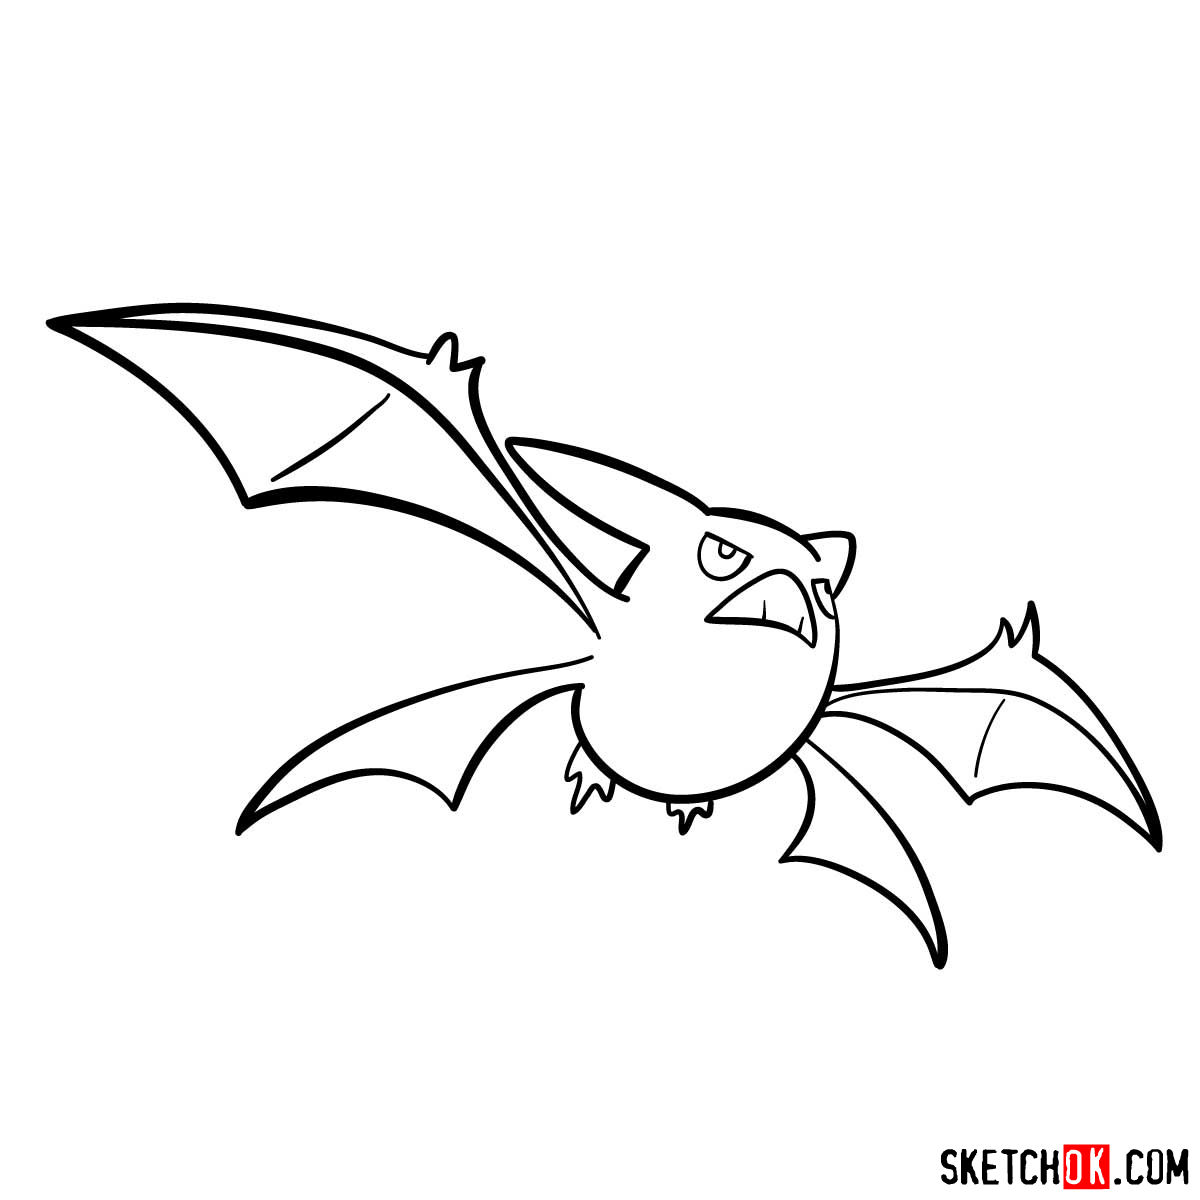 How to draw Crobat Pokemon - Sketchok easy drawing guides